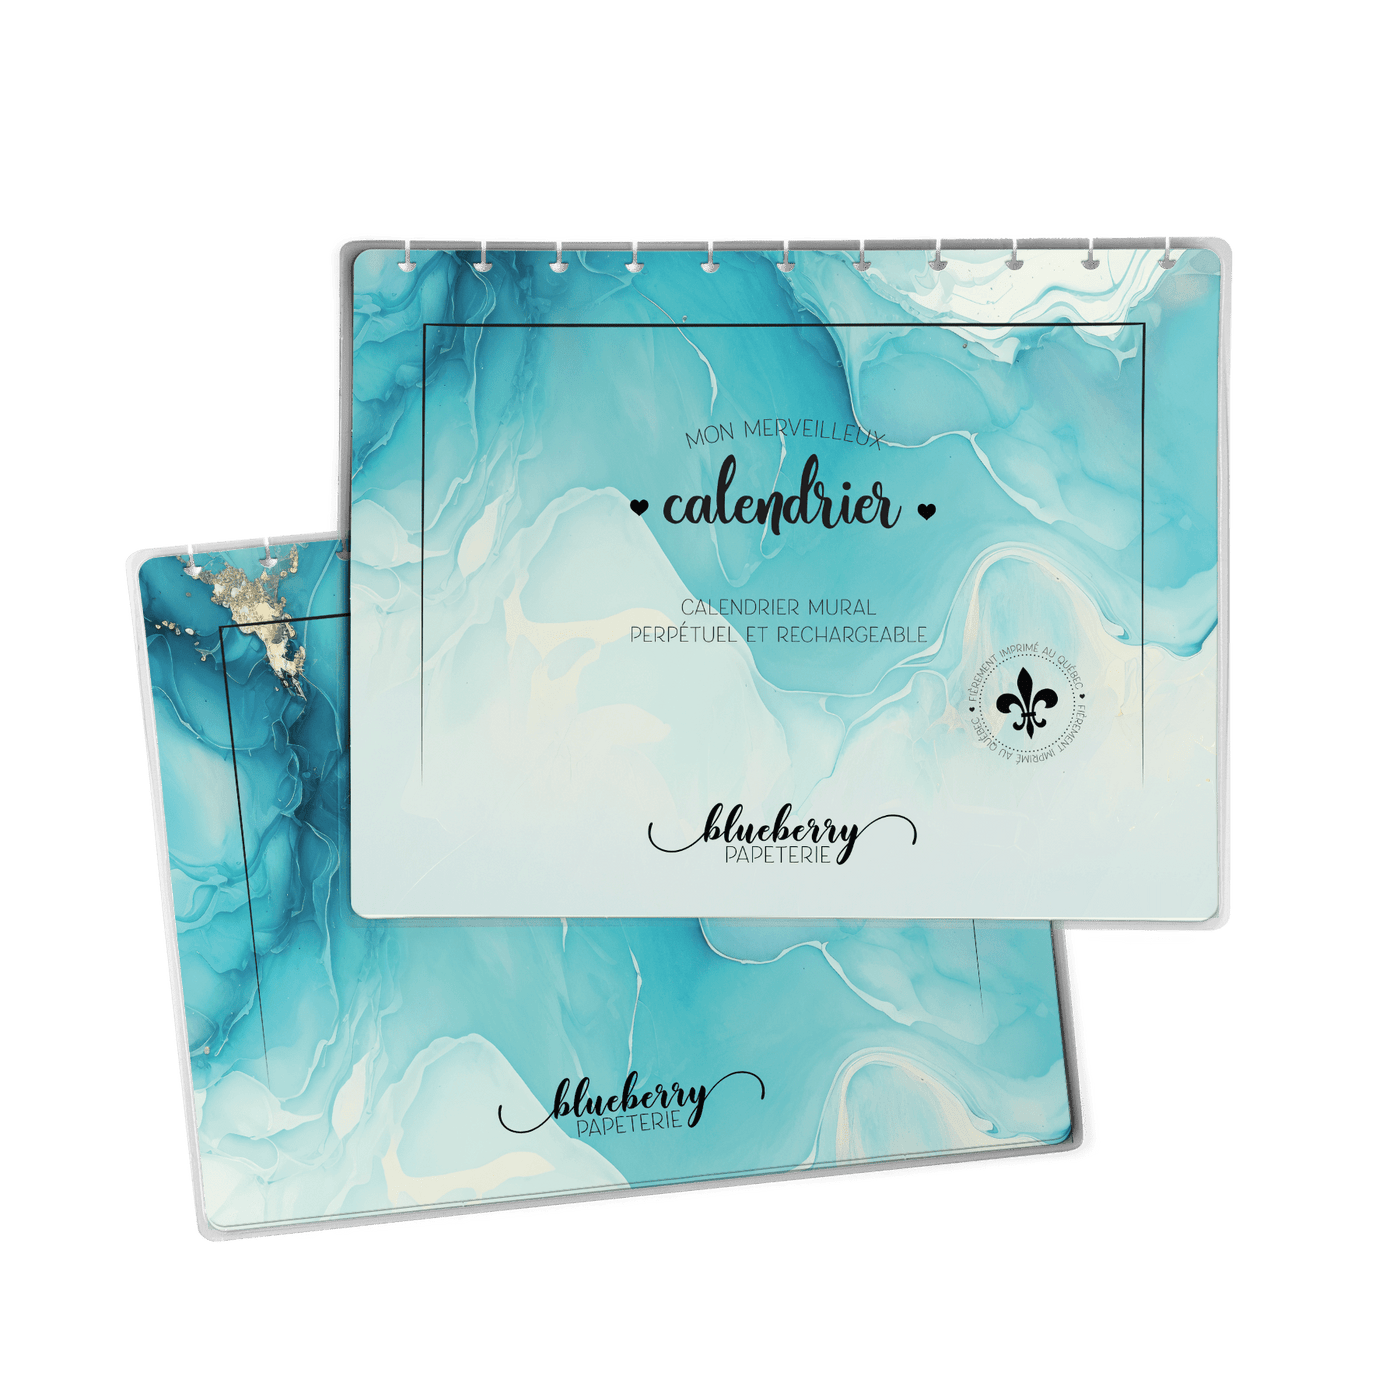 Couverture pour calendrier mural - Blueberry Papeterie